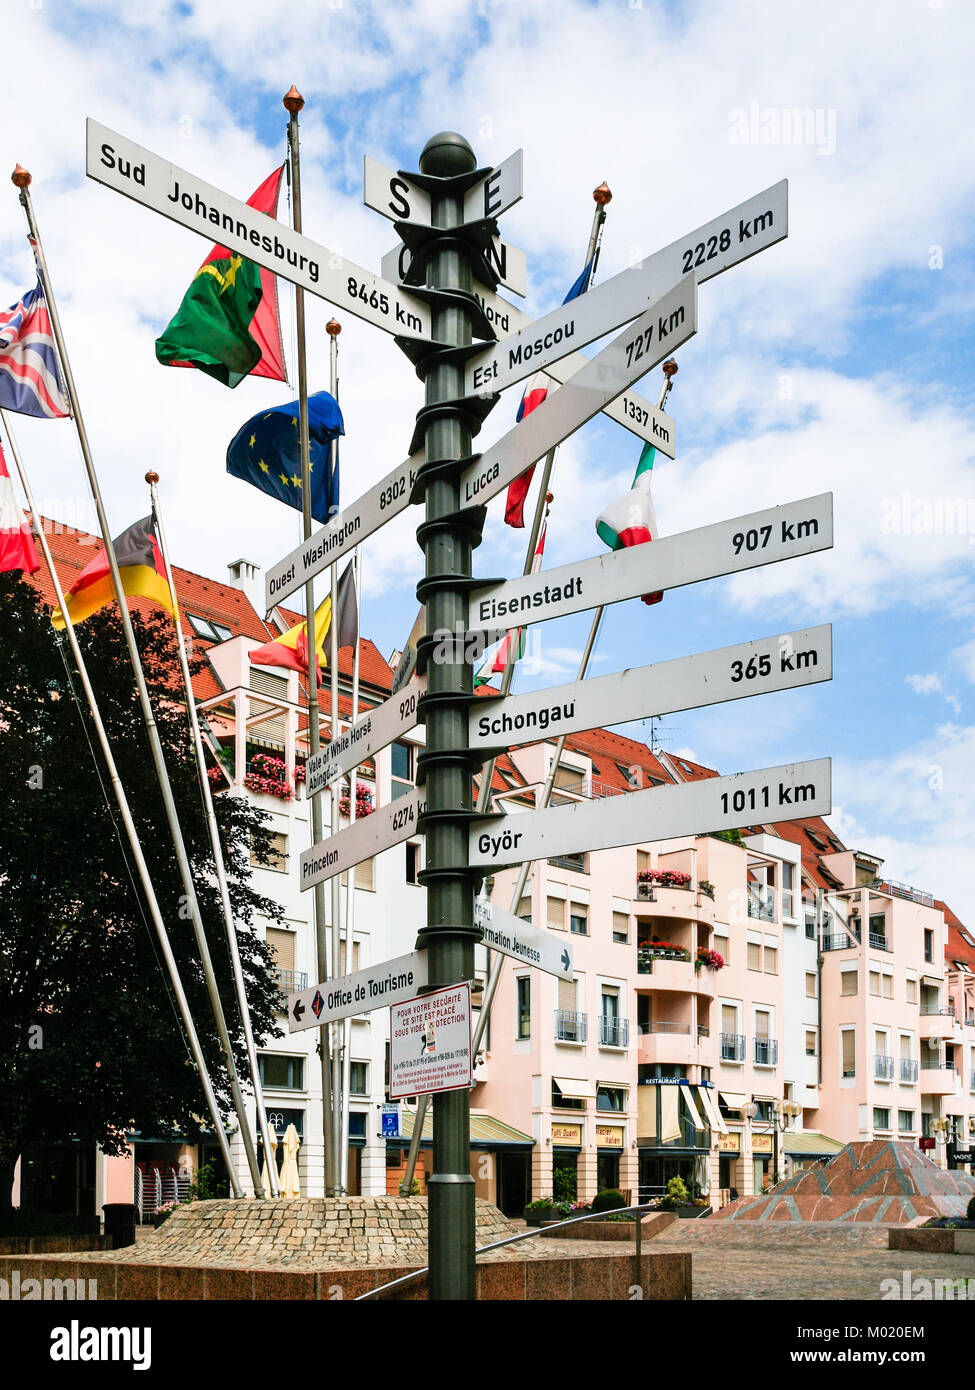 COLMAR, FRANCE - JULY 11, 2010: geographic marker with travel distance to cities and european flags on square Place de la Mairie in Colmar city. Colma Stock Photo